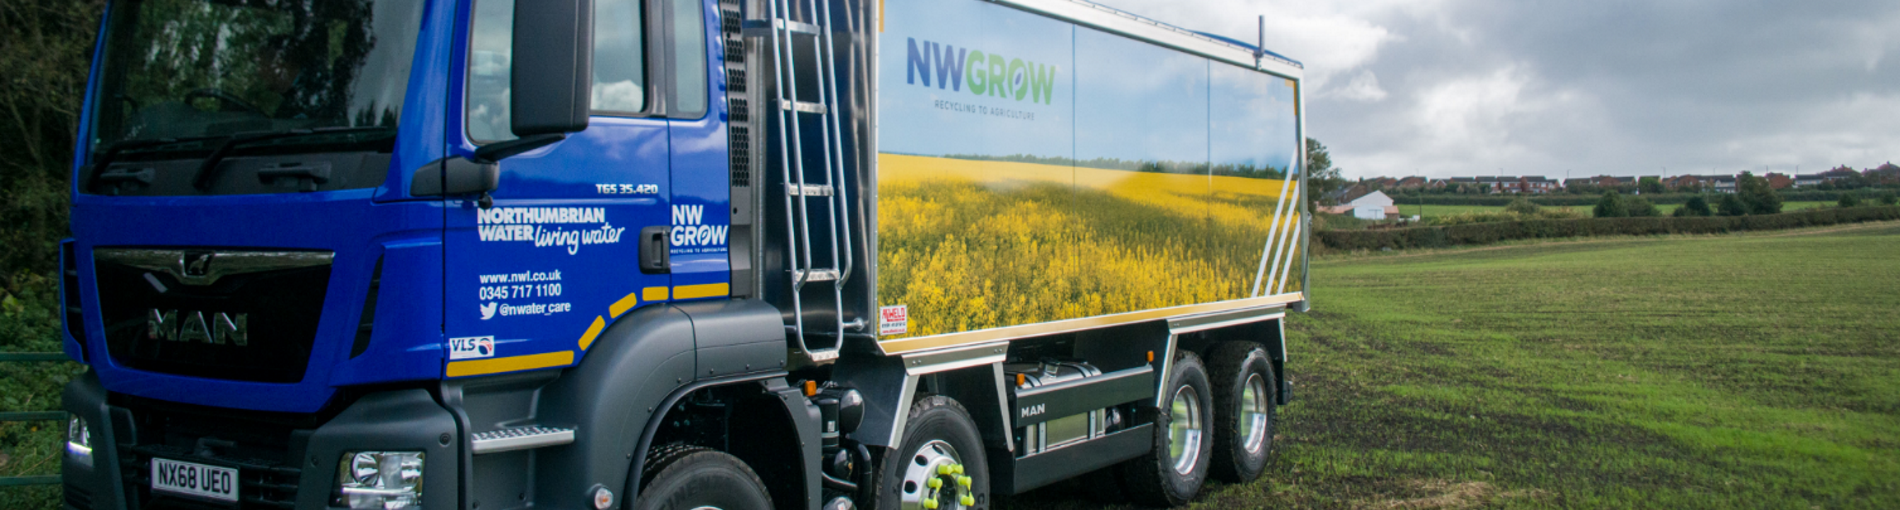 Northumbrian Water lorry with NWGROW logo in field